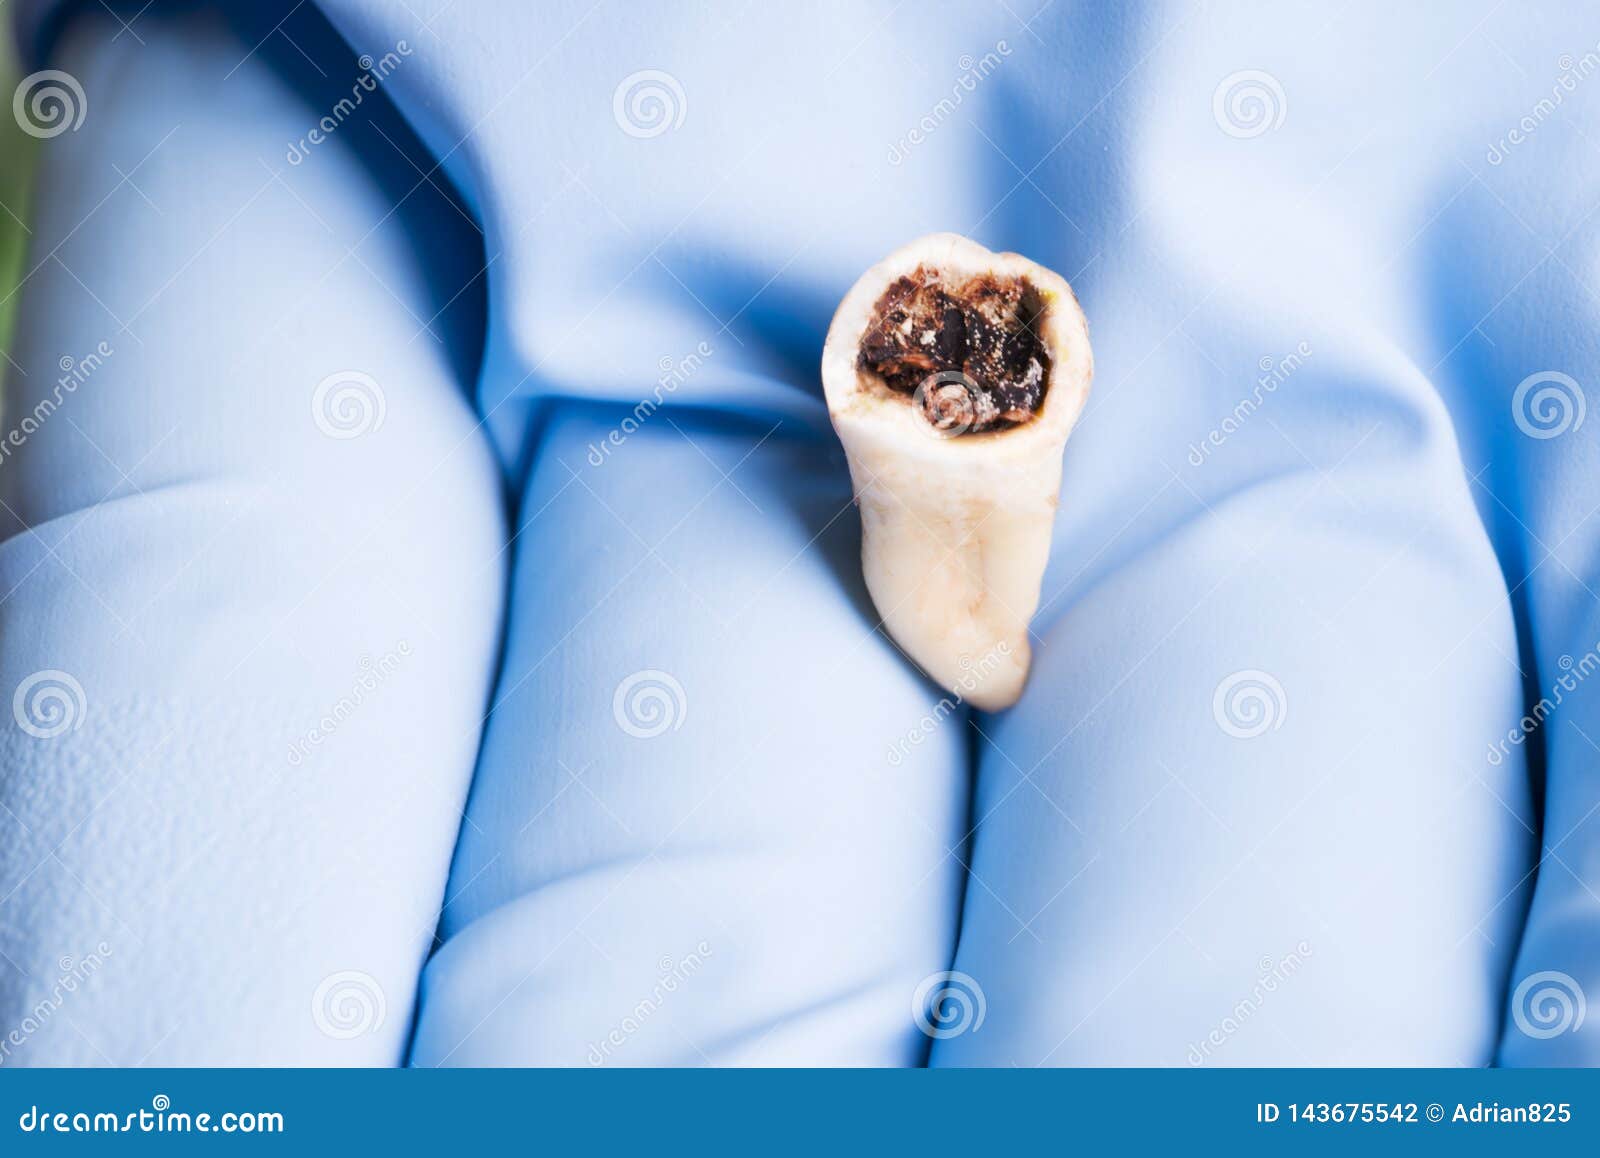 extracted rotter molar  in dentistÃ¢â¬â¢s hand with blue medical glove